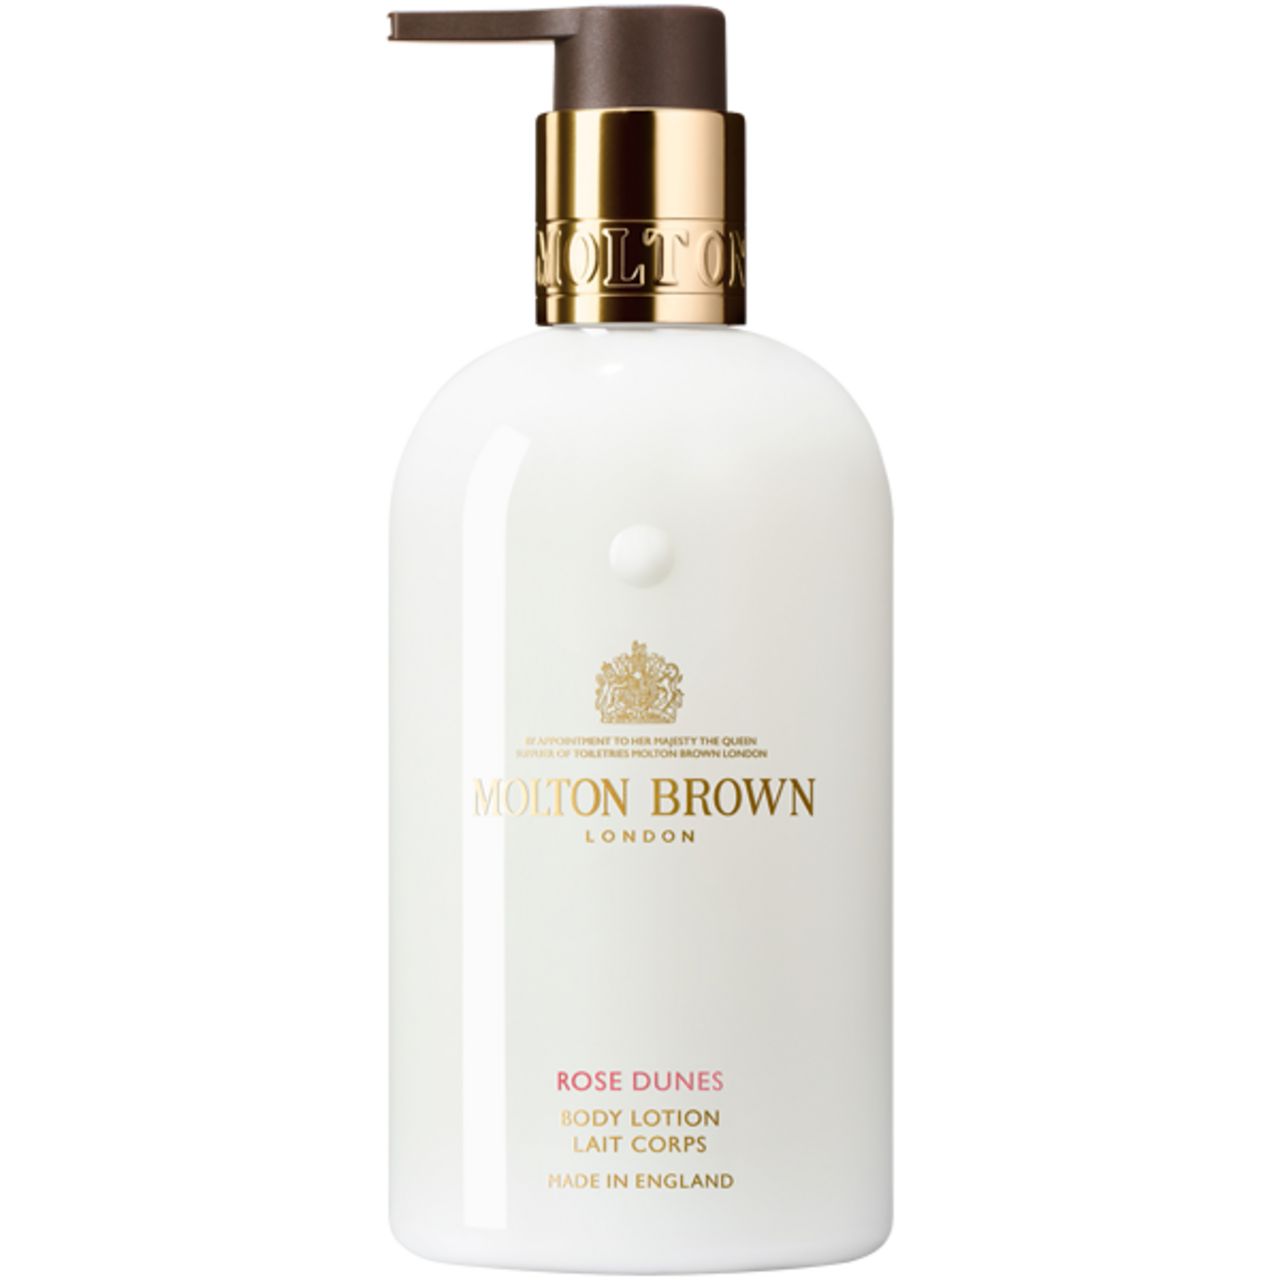 Molton Brown, Rose Dunes Body Lotion